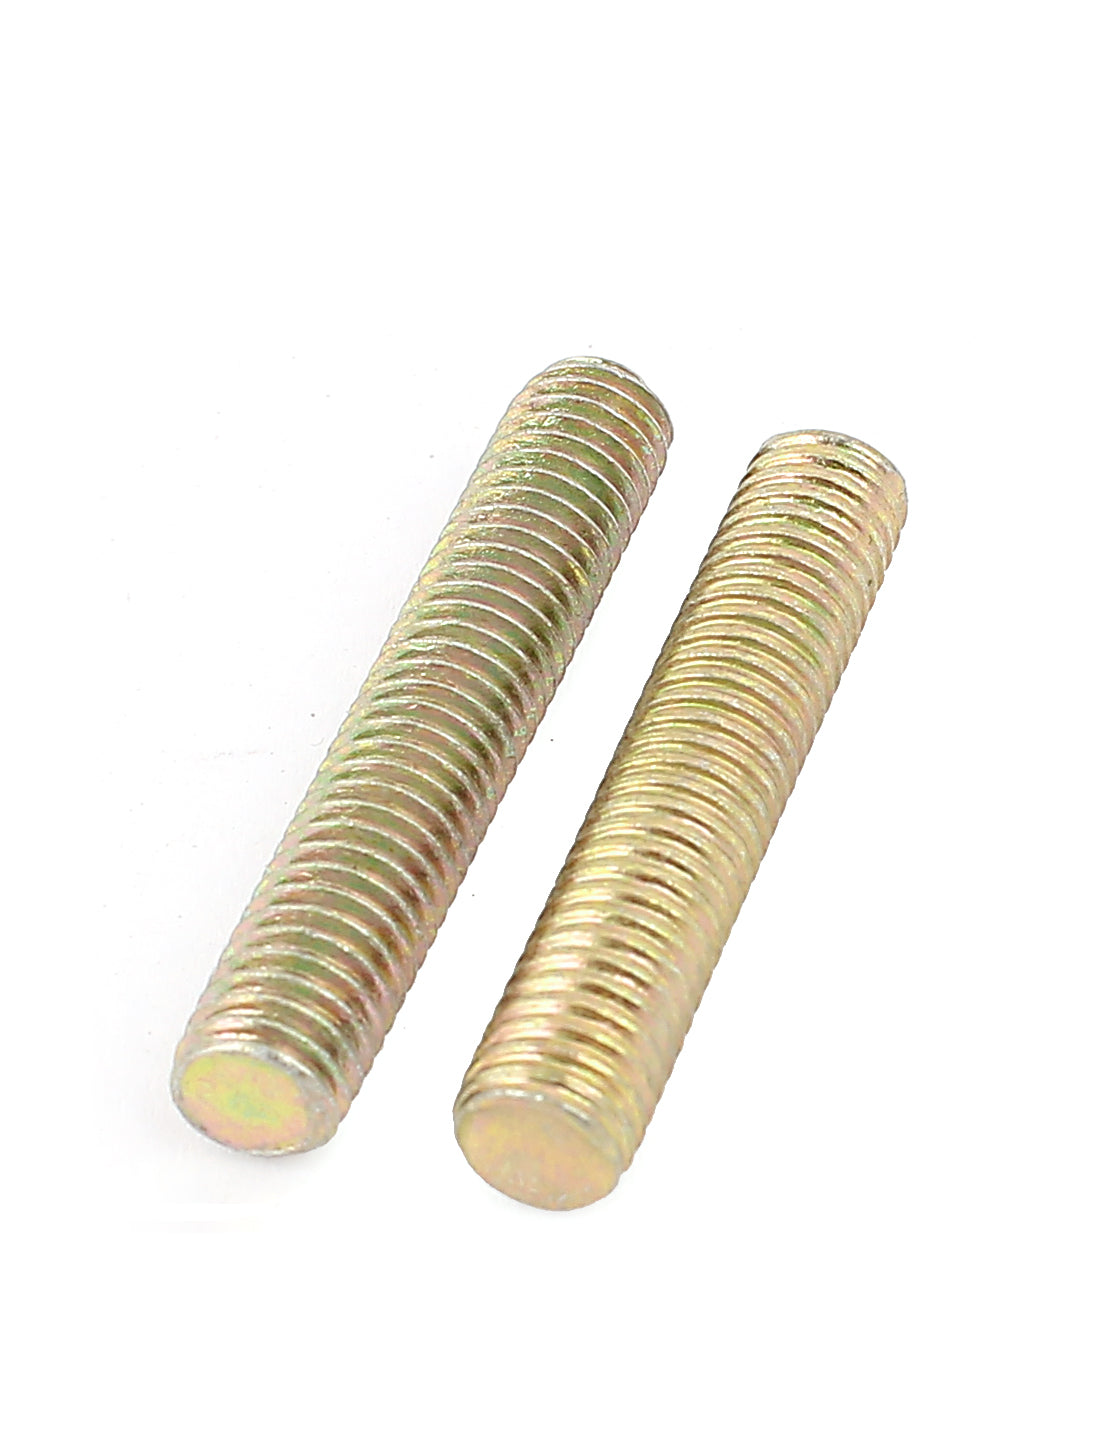 uxcell Uxcell 1.25mm Pitch M8 x 40mm Male Threaded Rod Bar Bronze Tone 6 Pcs